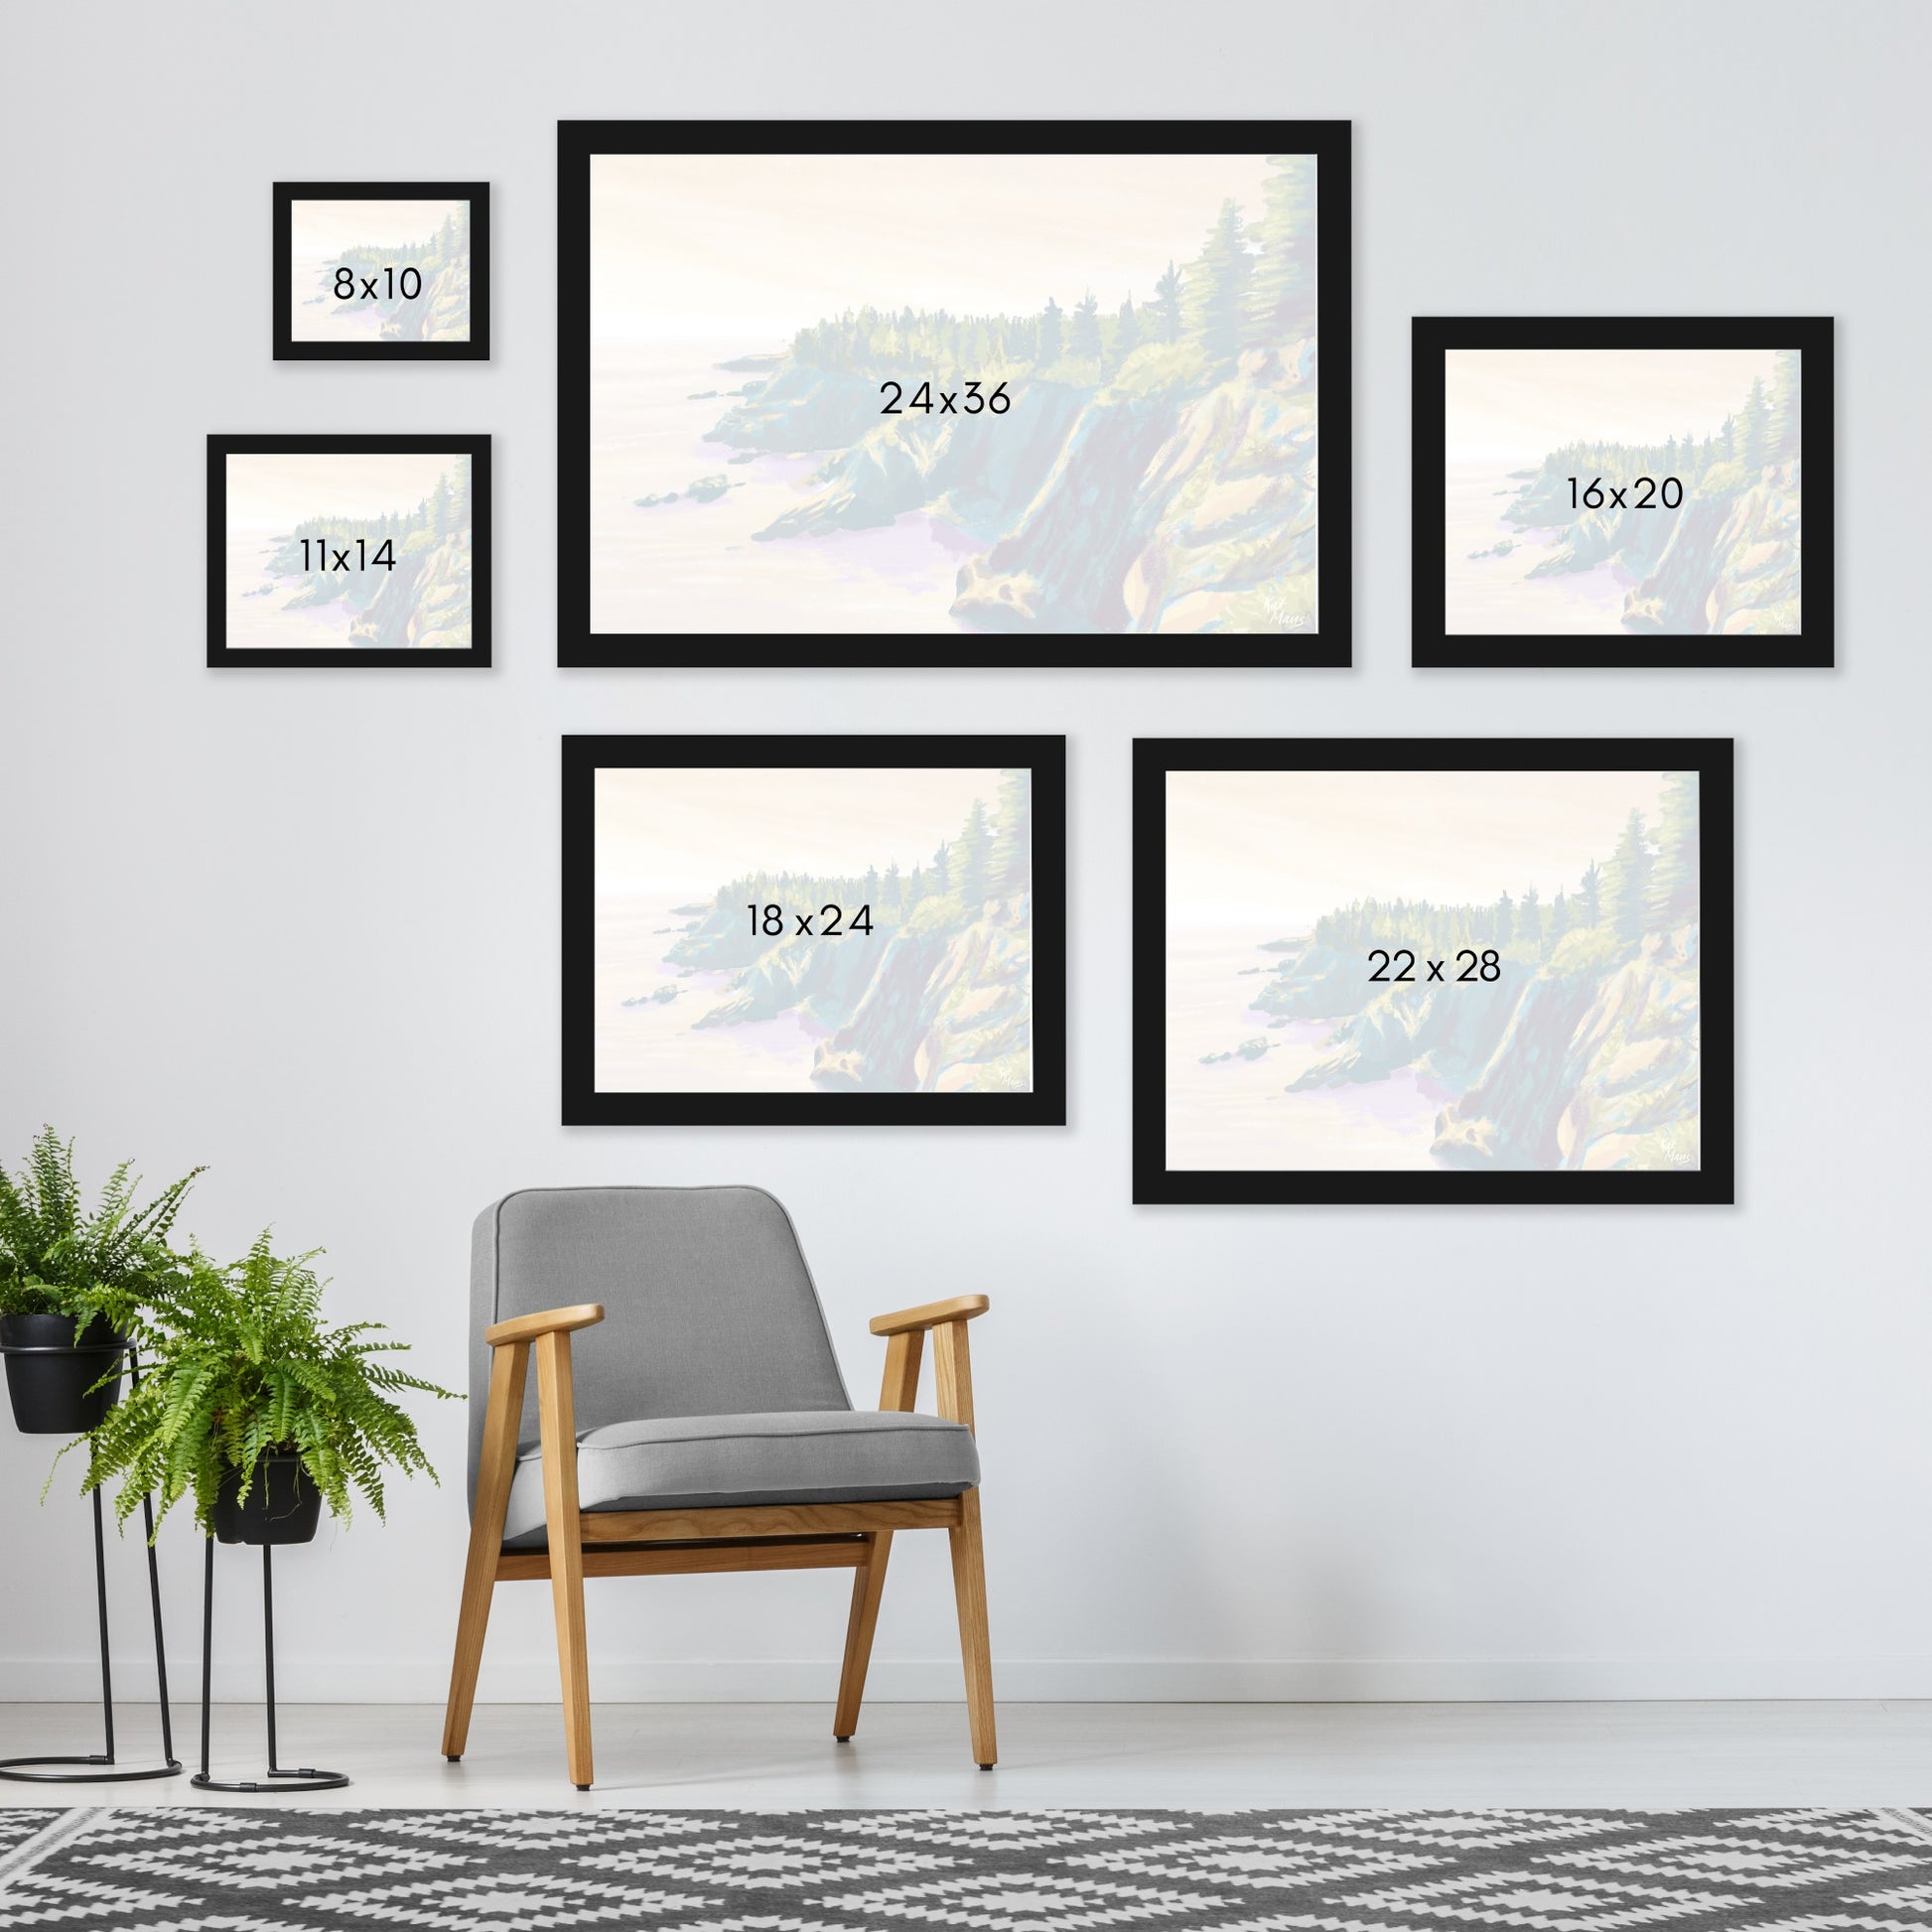 Quoddy Head State Park Me by Kat Maus  - Framed Print